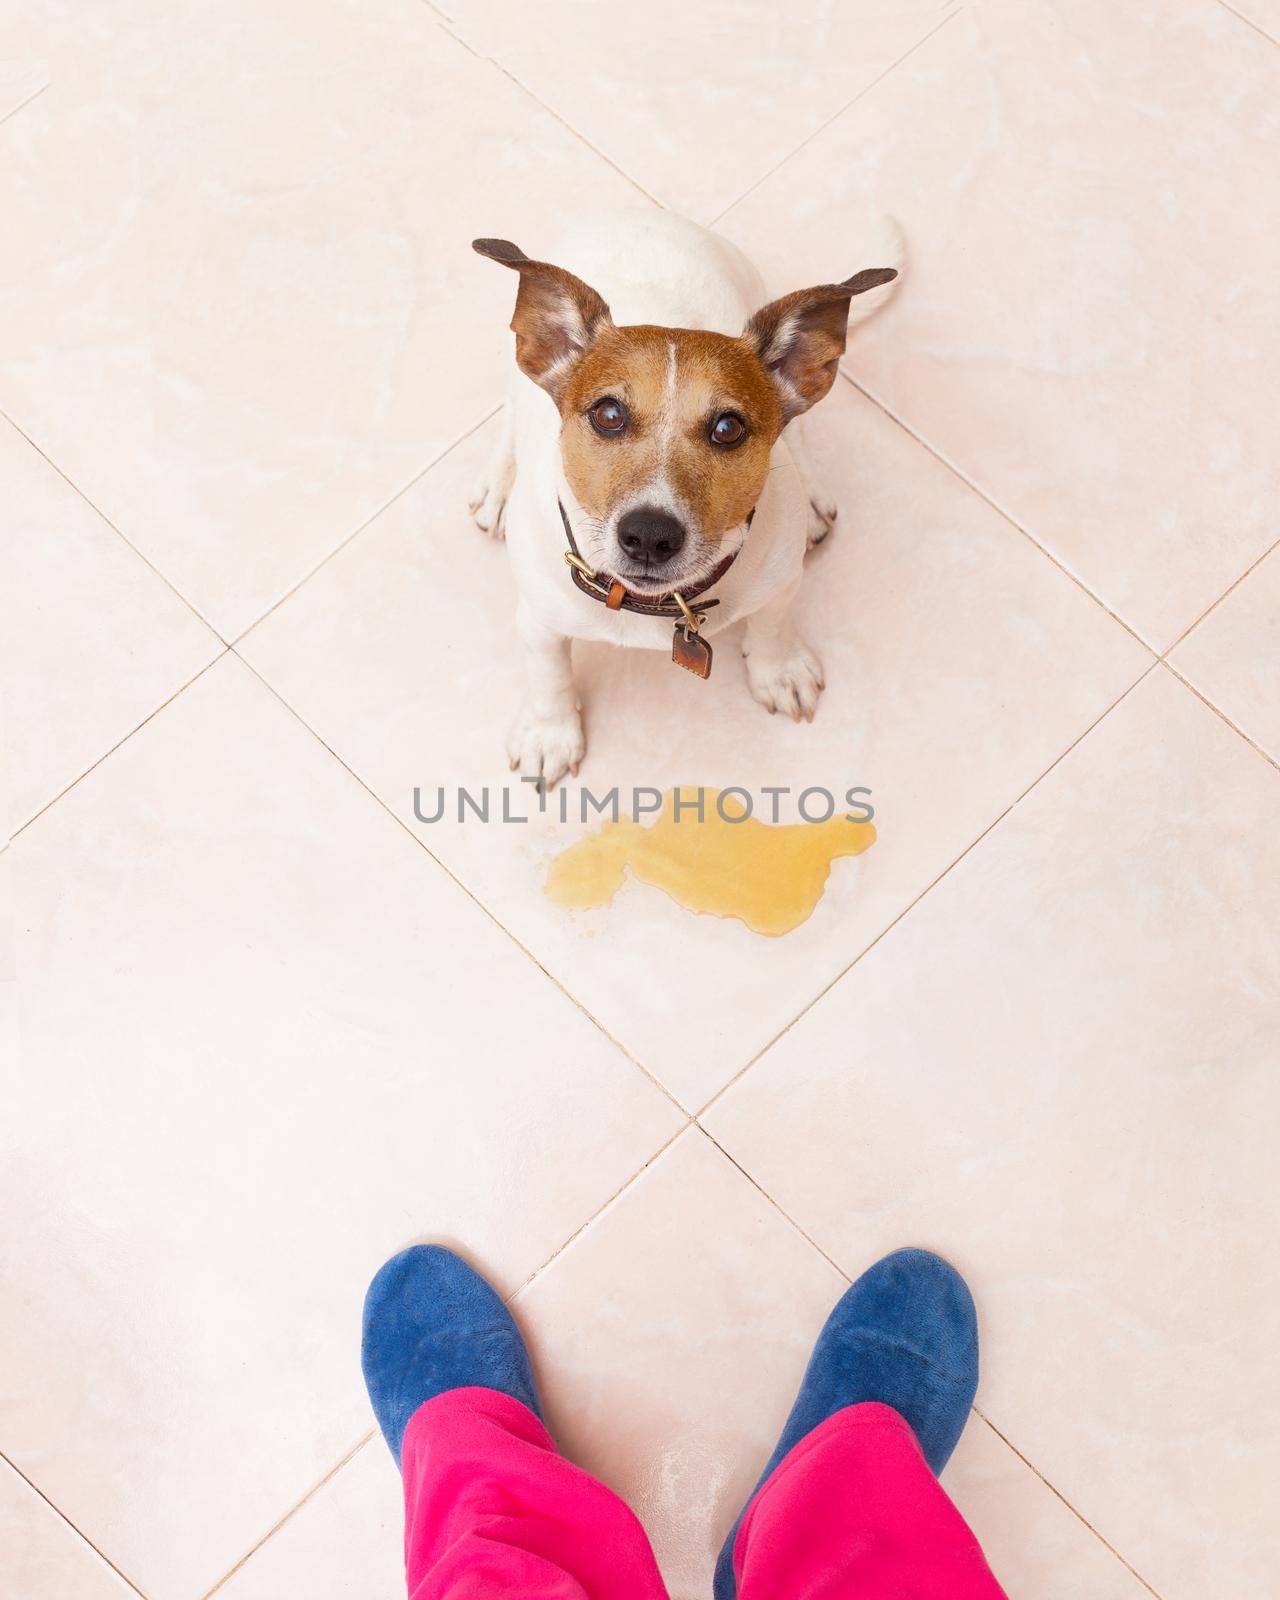 jack russell dog being punished for urinate or pee  at home by his owner, isolated on the floor